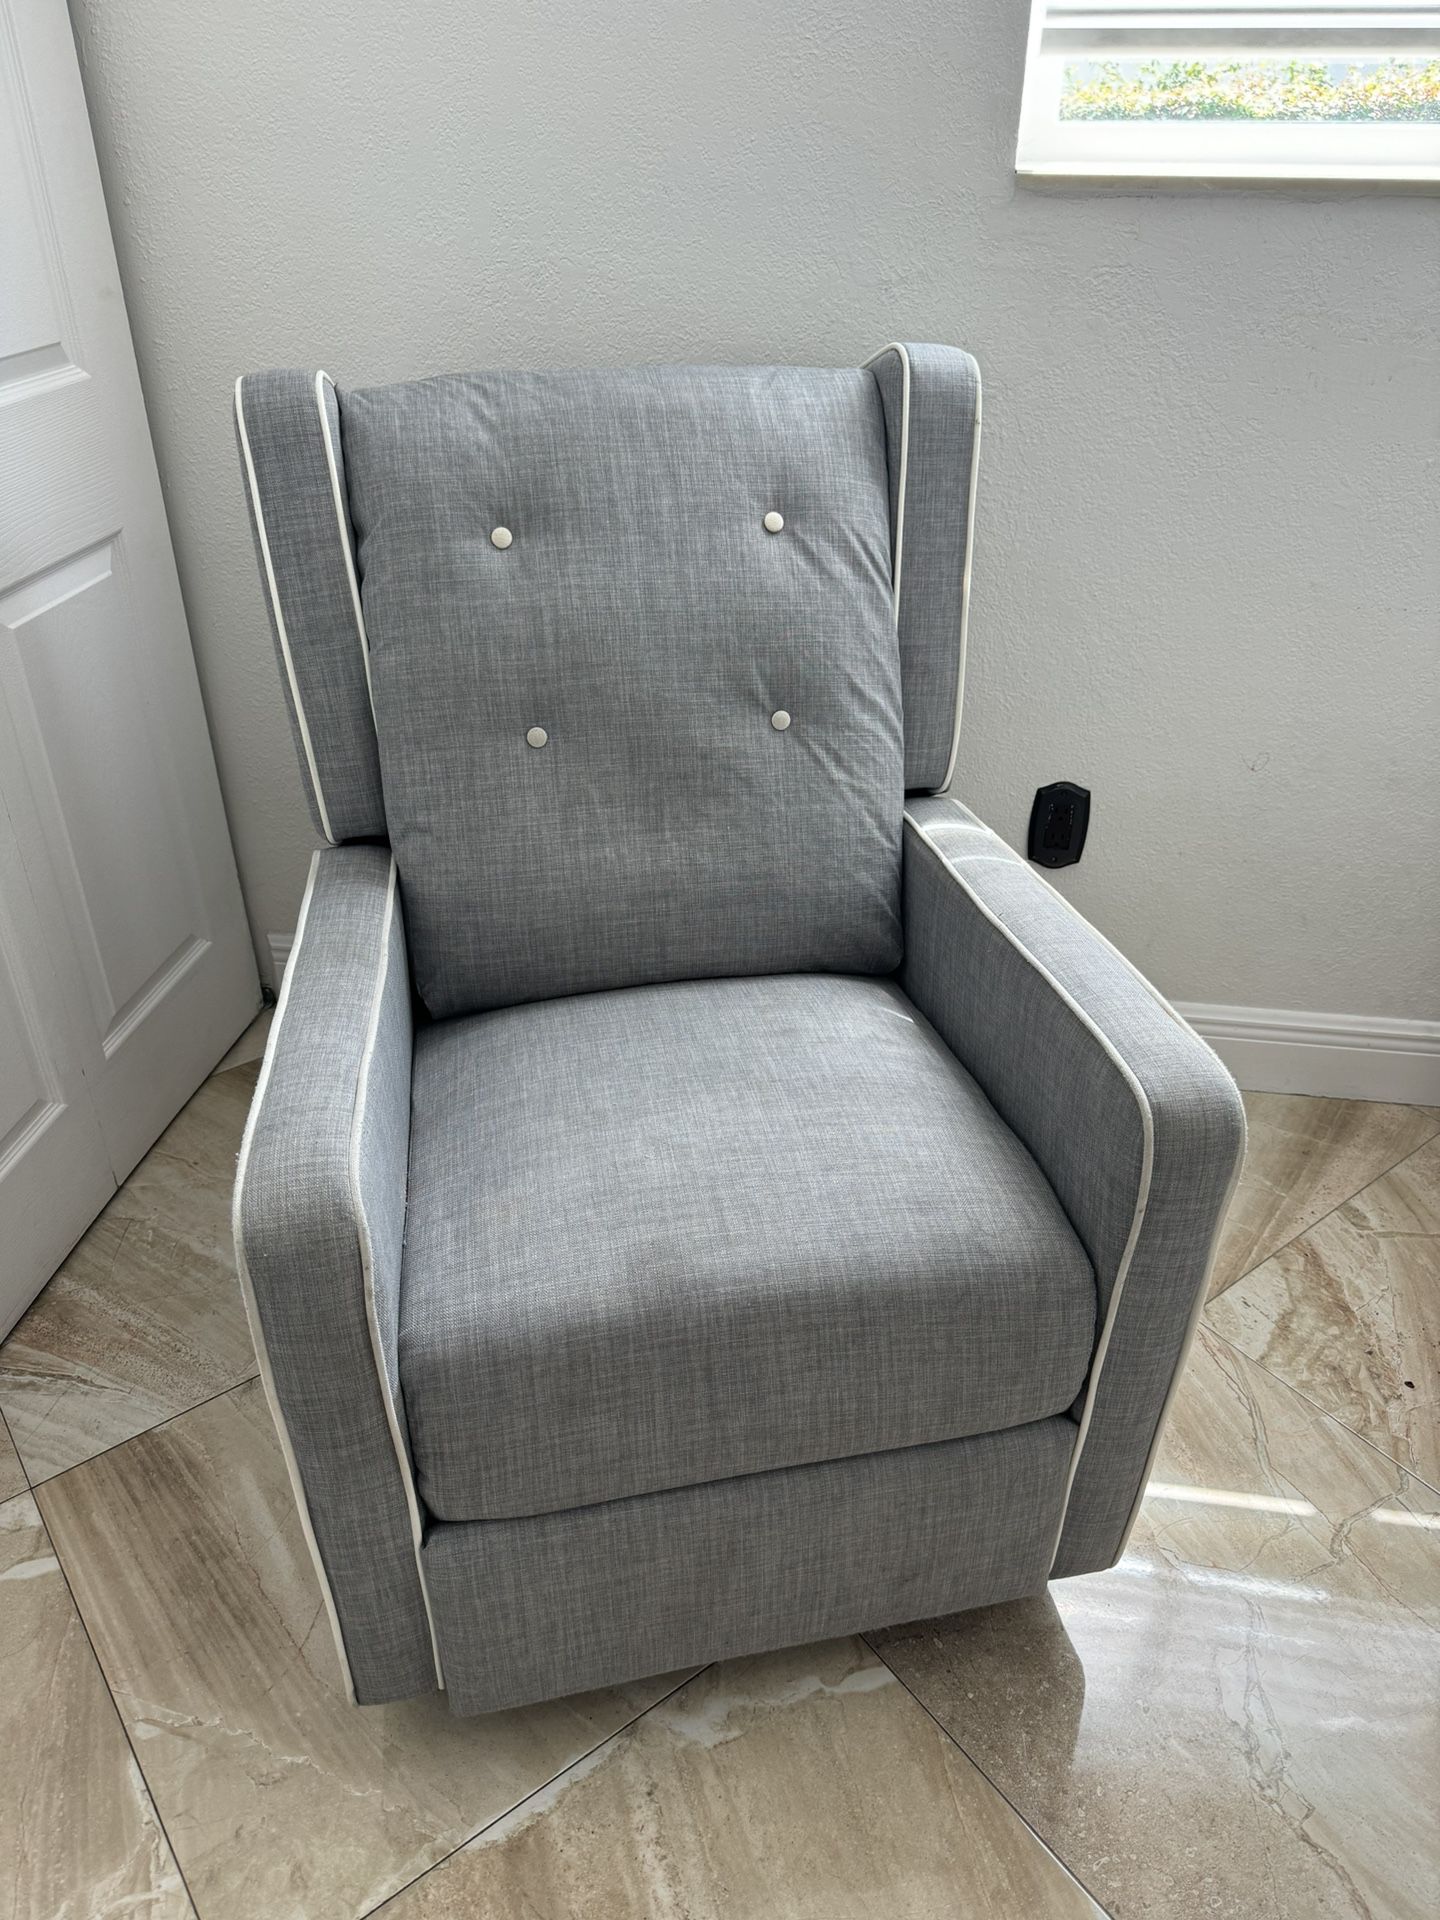 Grey Rocking Chair Recliner/ Reclinable